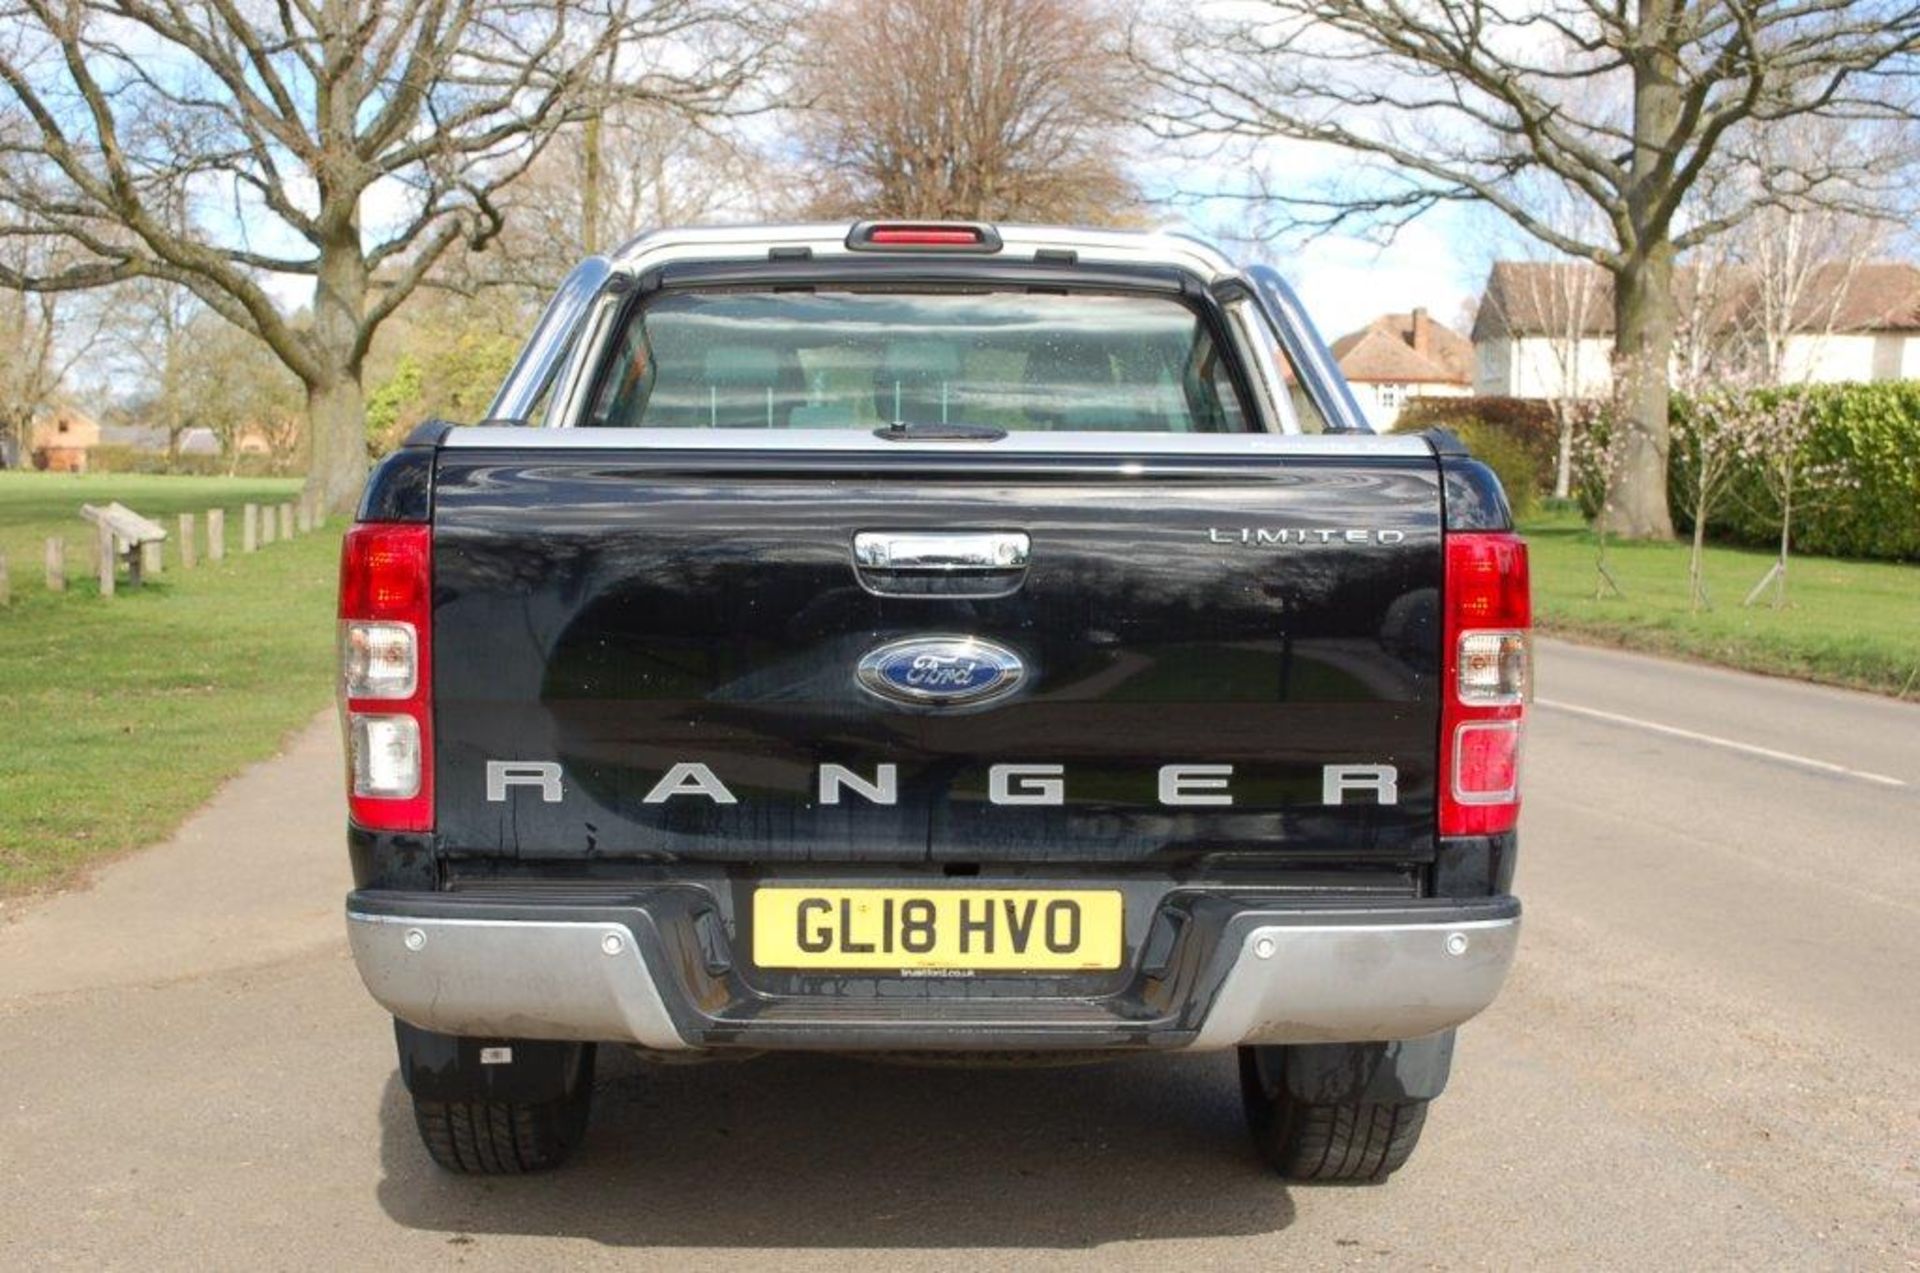 Ford RANGER LIMITED 4X4 2.2 6-SPEED AUTOMATIC DCB - Image 6 of 11